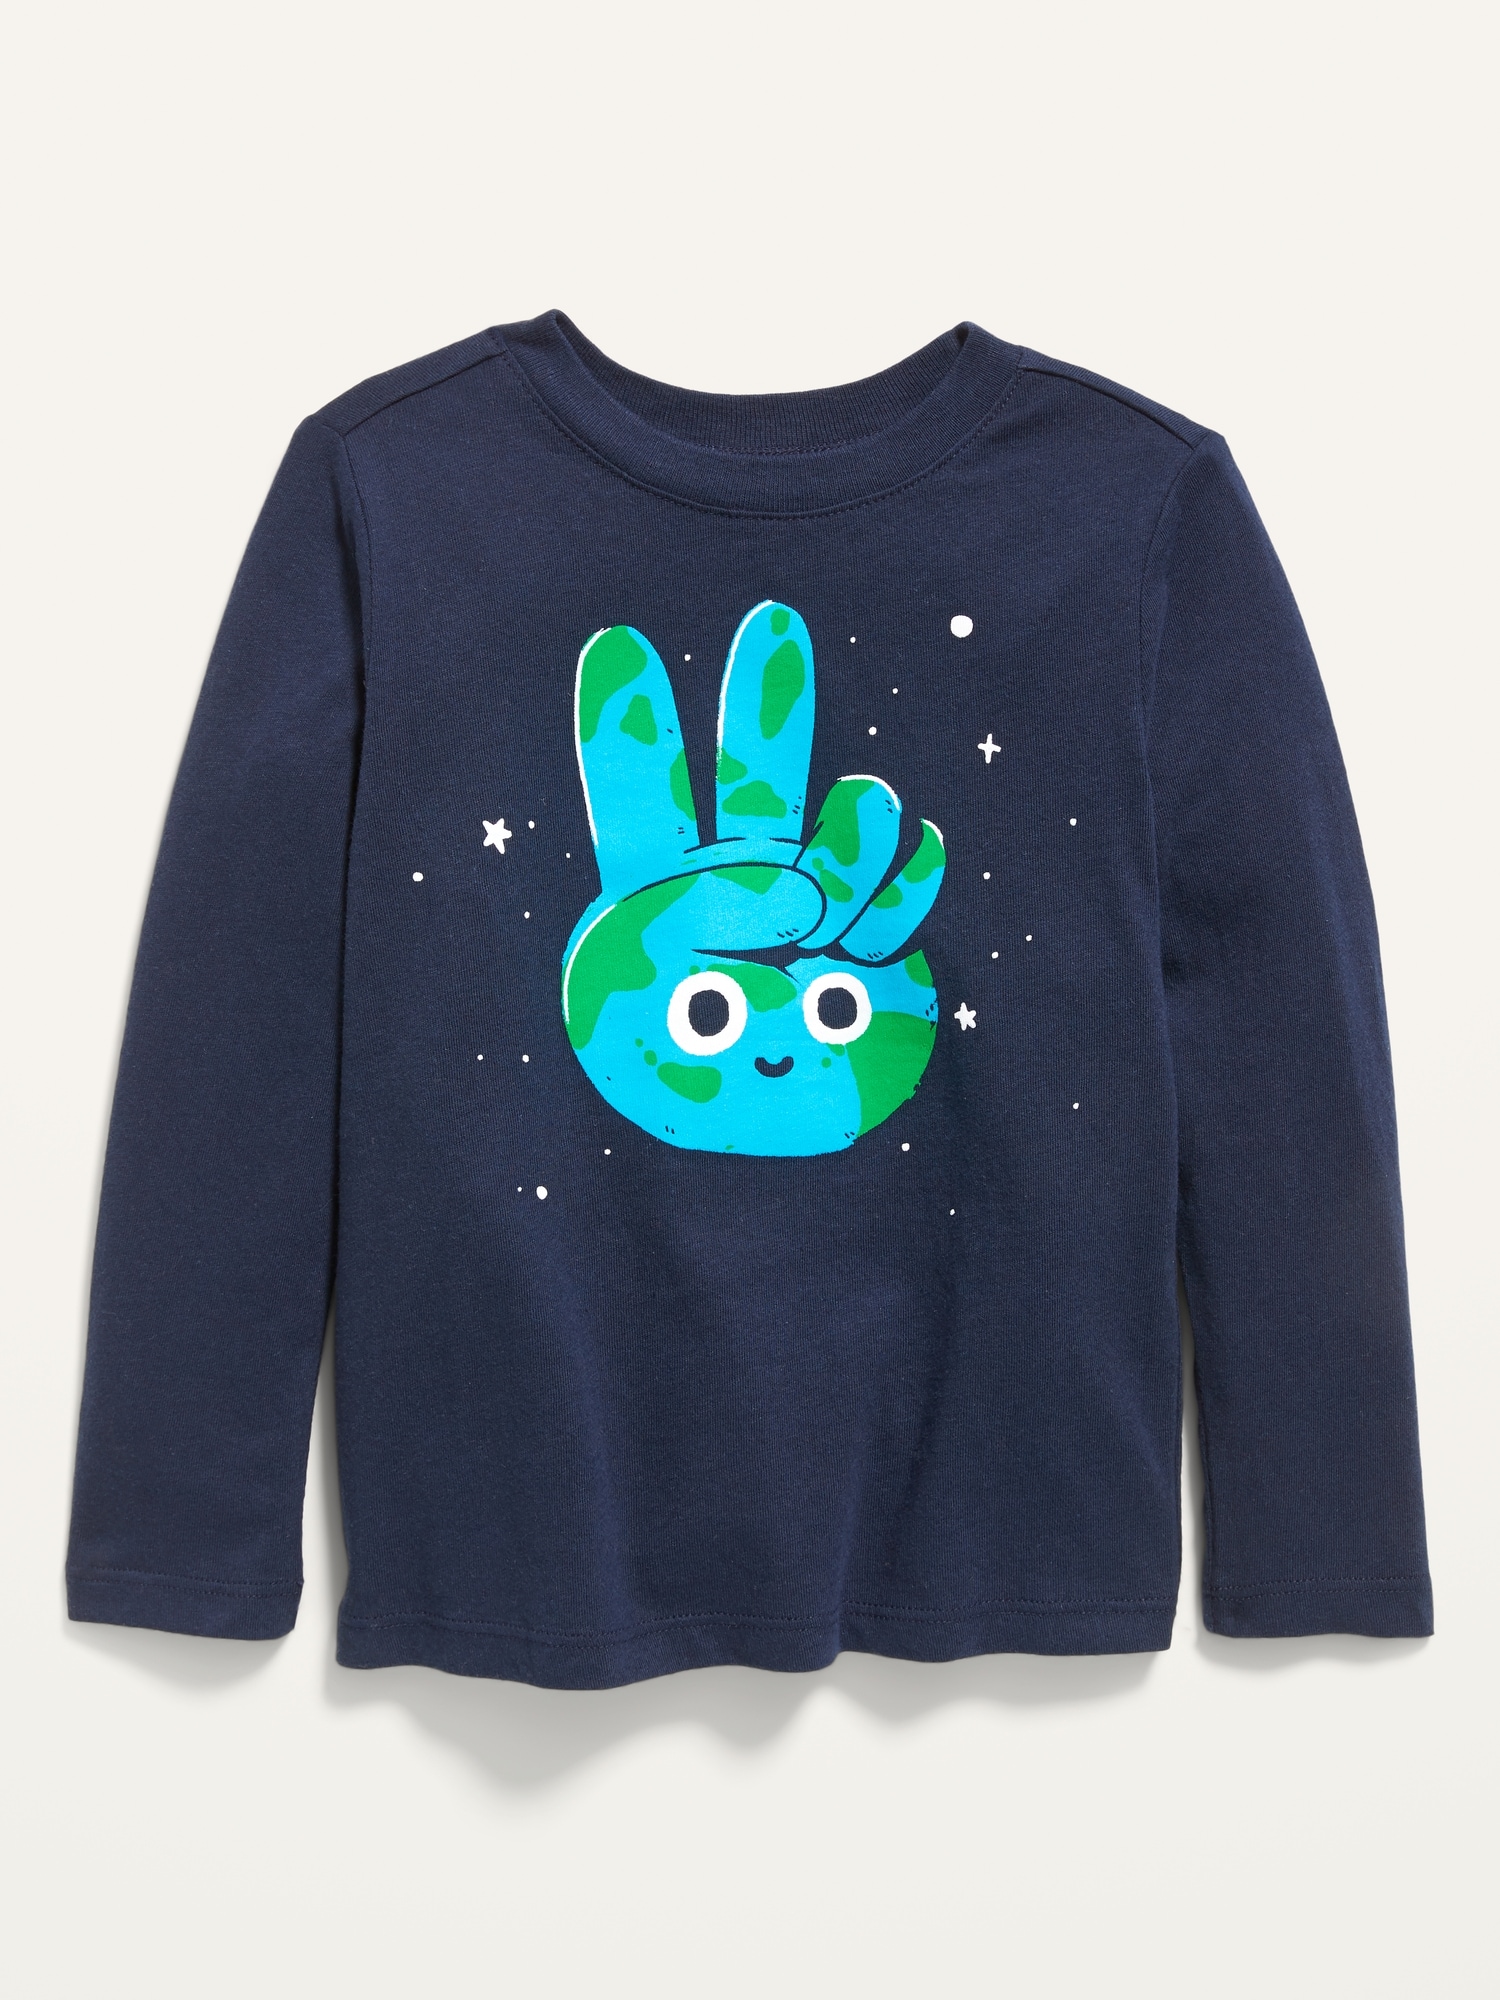 Unisex Long-Sleeve Graphic Tee for Toddler 